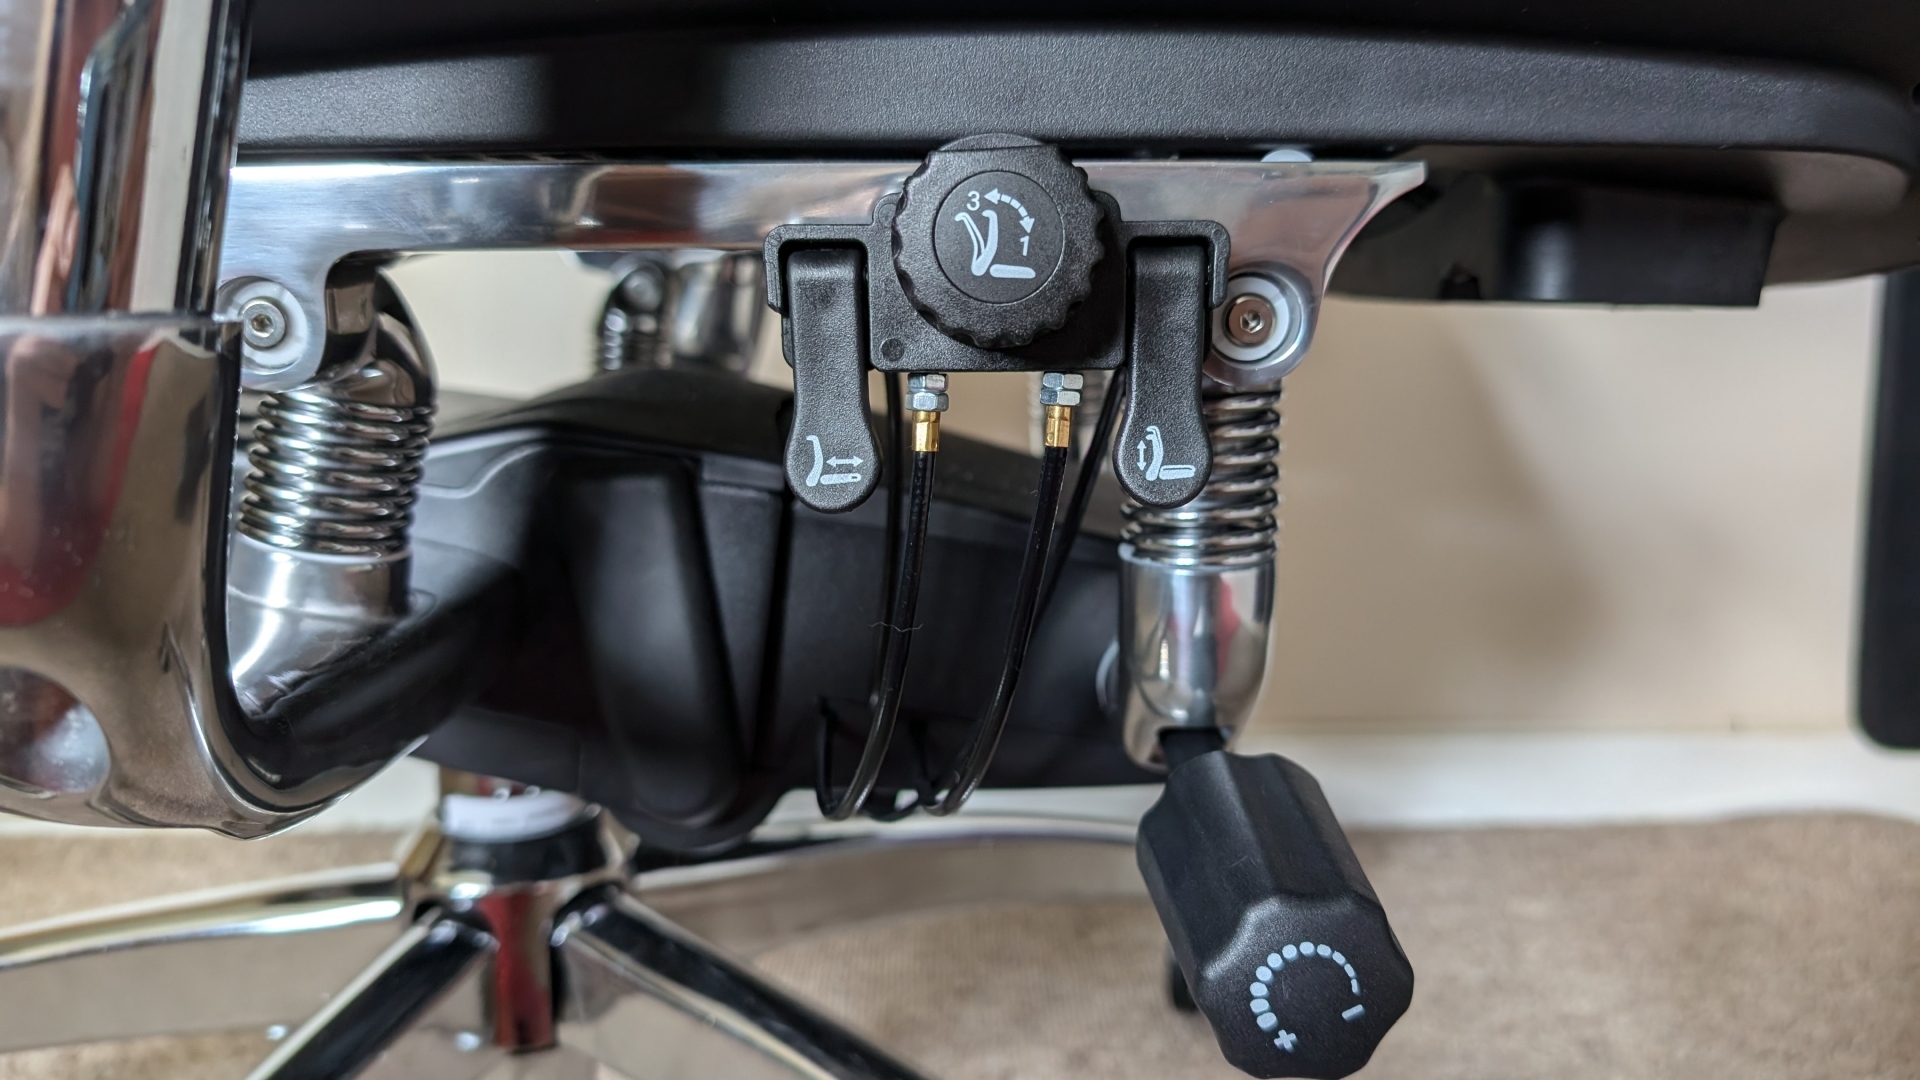 Sihoo S300 ergonomic office chair review image showing all the adjustment knobs on the chair.